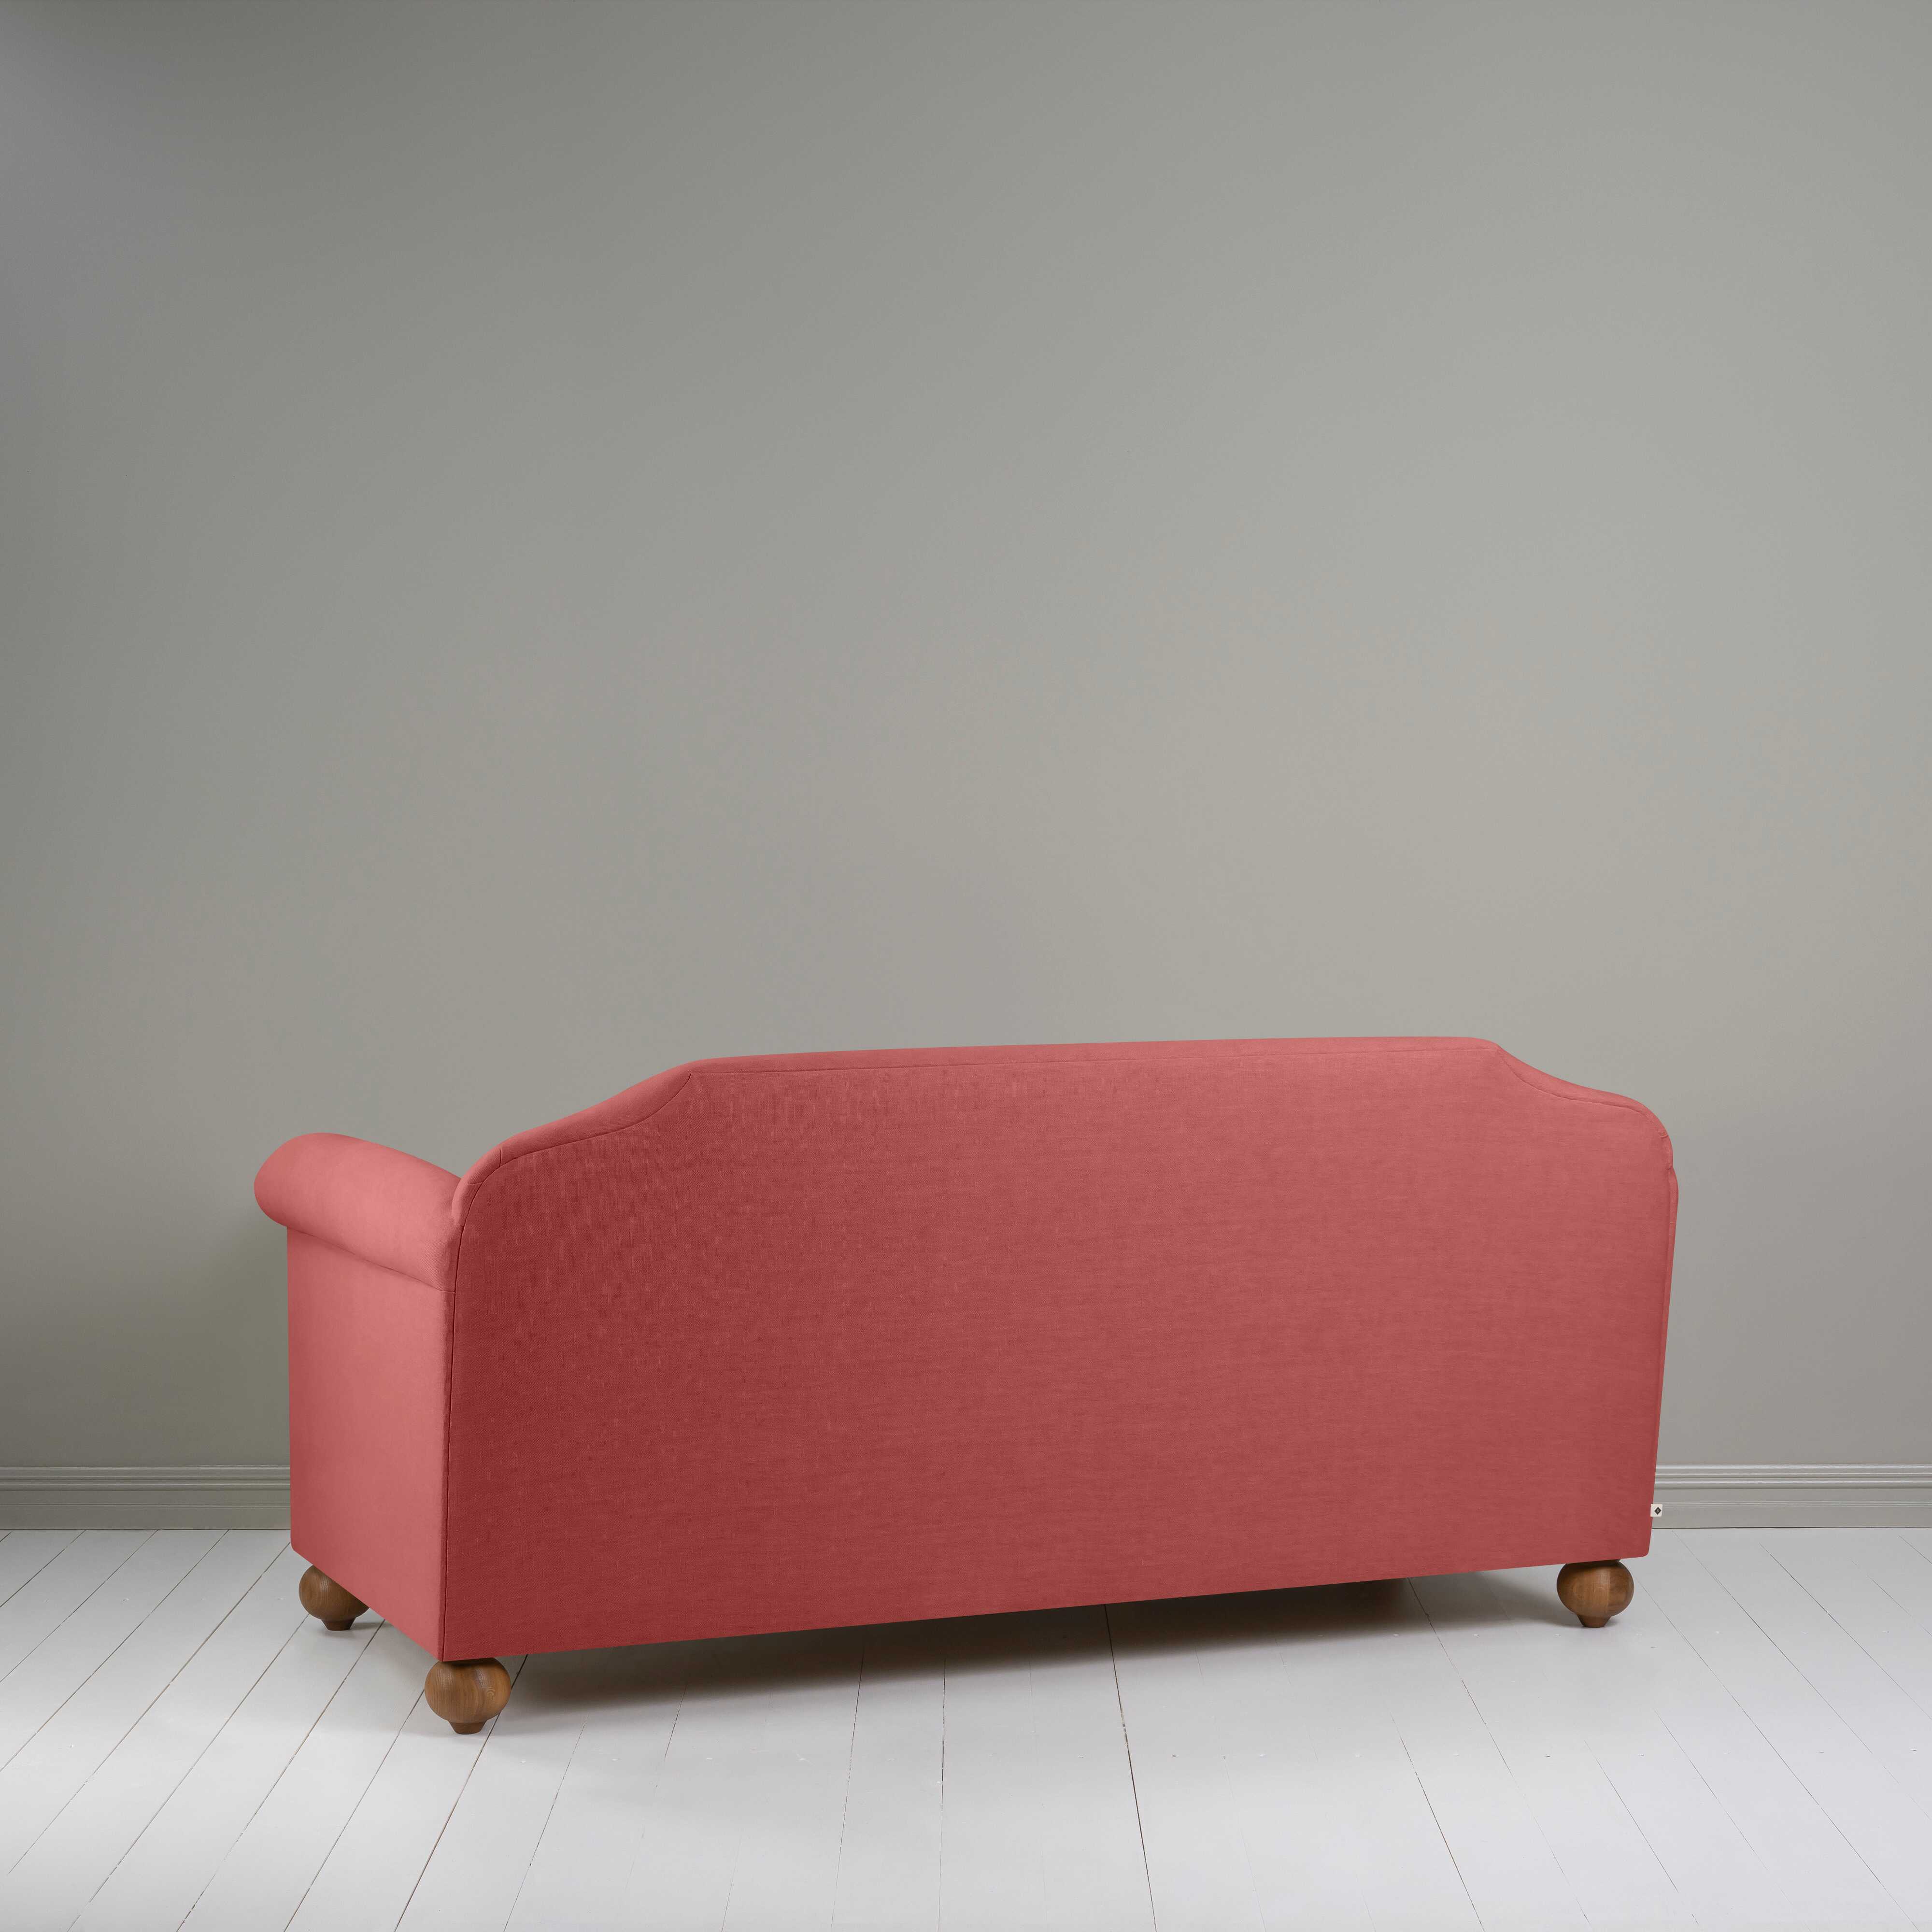  Dolittle 3 Seater Sofa in Laidback Linen Rouge 